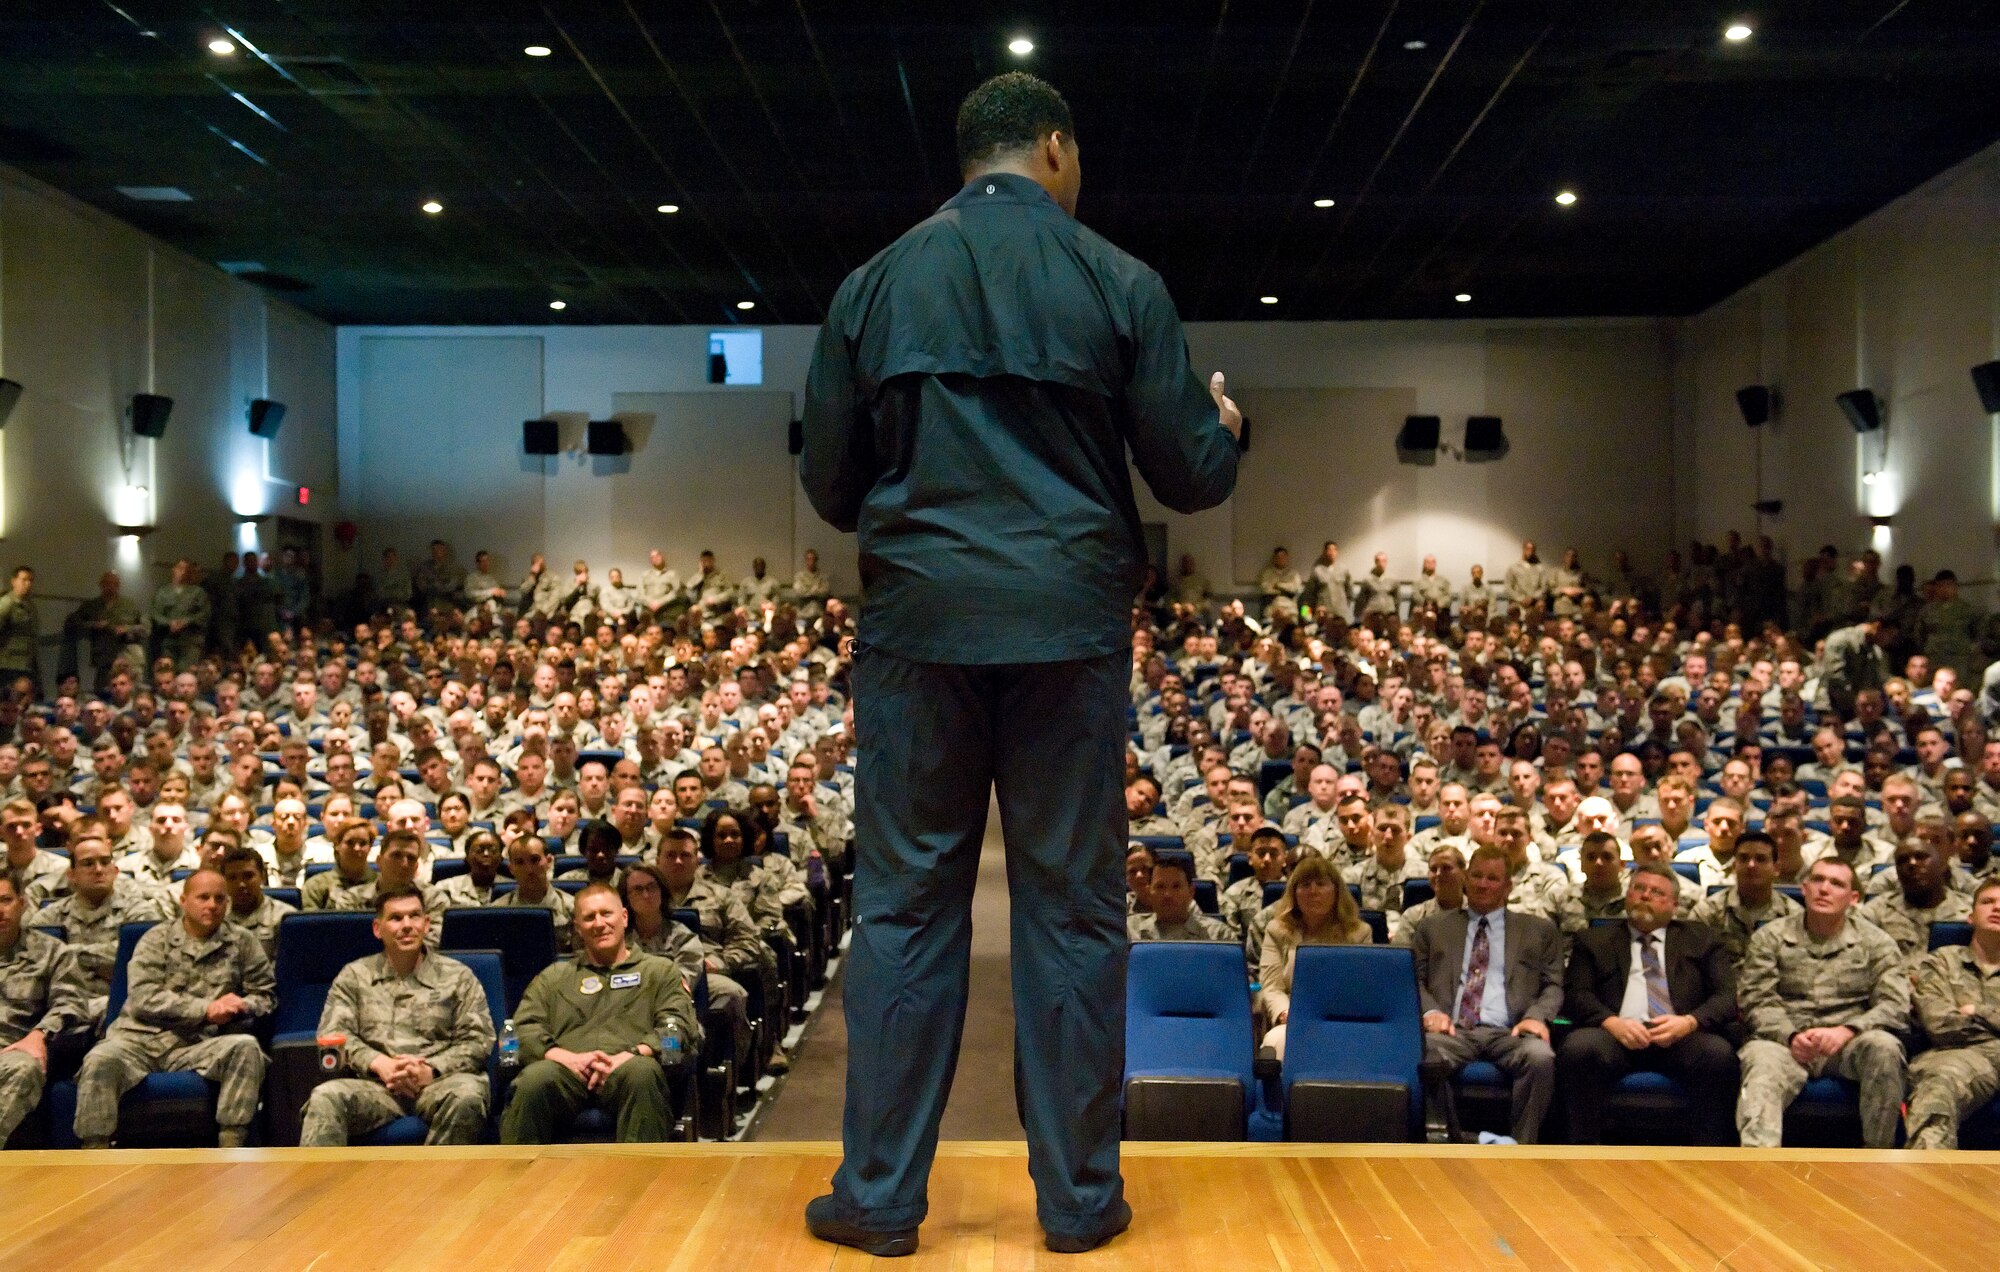 Speaking to a standing-room-only audience, former NFL running back and 1982 Heisman Trophy winner Herschel Walker speaks to military and civilian Airmen of Team Dover on Wingman Day Oct. 14, 2015, at the base theater on Dover Air Force Base, Del. Walker, who was diagnosed with Dissociative Identity Disorder, shared his own personal experience and treatment by seeking help through behavioral health services. In partnership with the Patriot Support Program and part of the program's anti-stigma campaign message, he emphasized to those in attendance that it is OK to ask for help. (U.S. Air Force photo/Roland Balik)